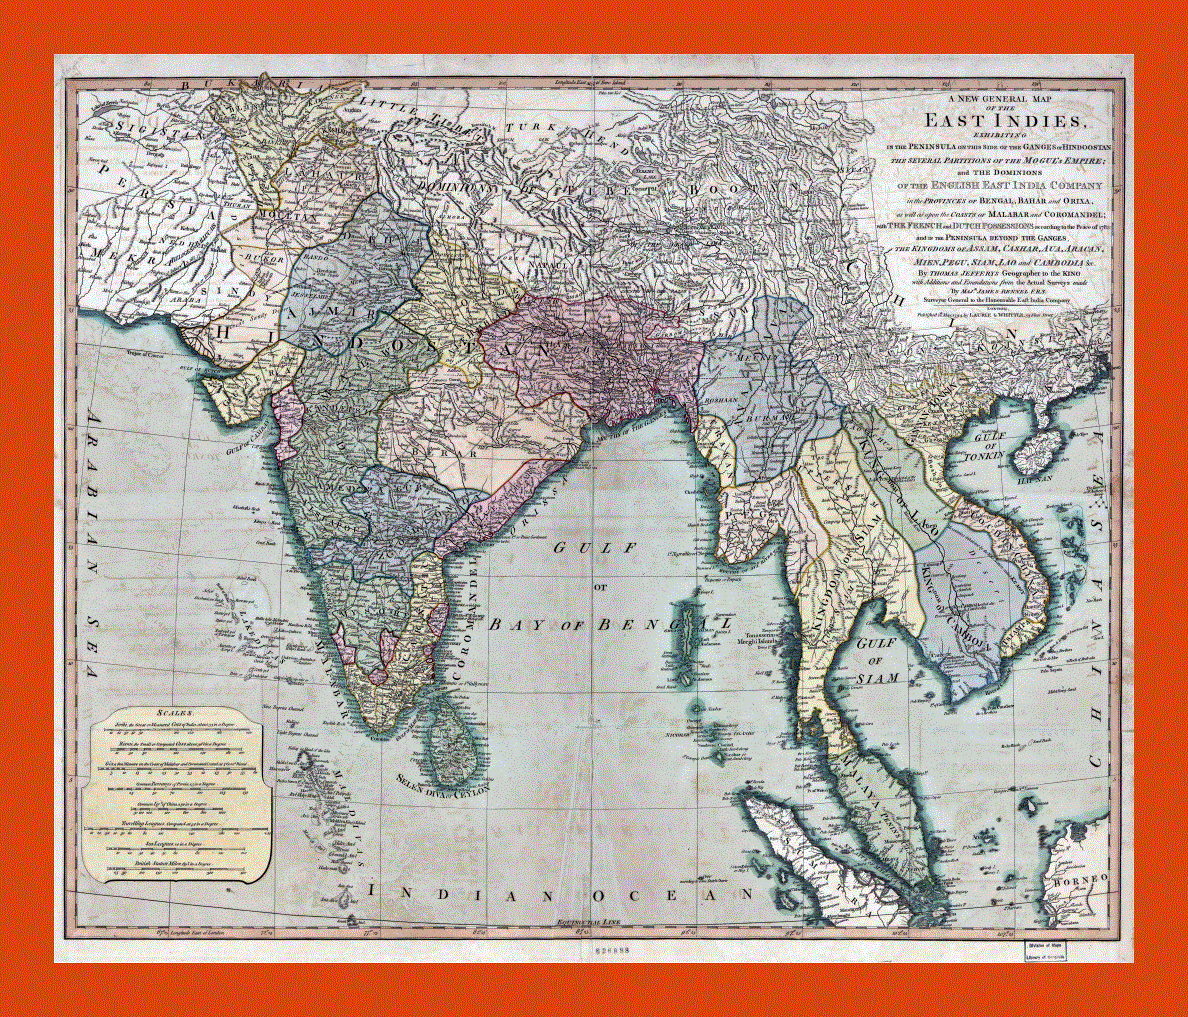 Antique general map of the East Indies - 1794